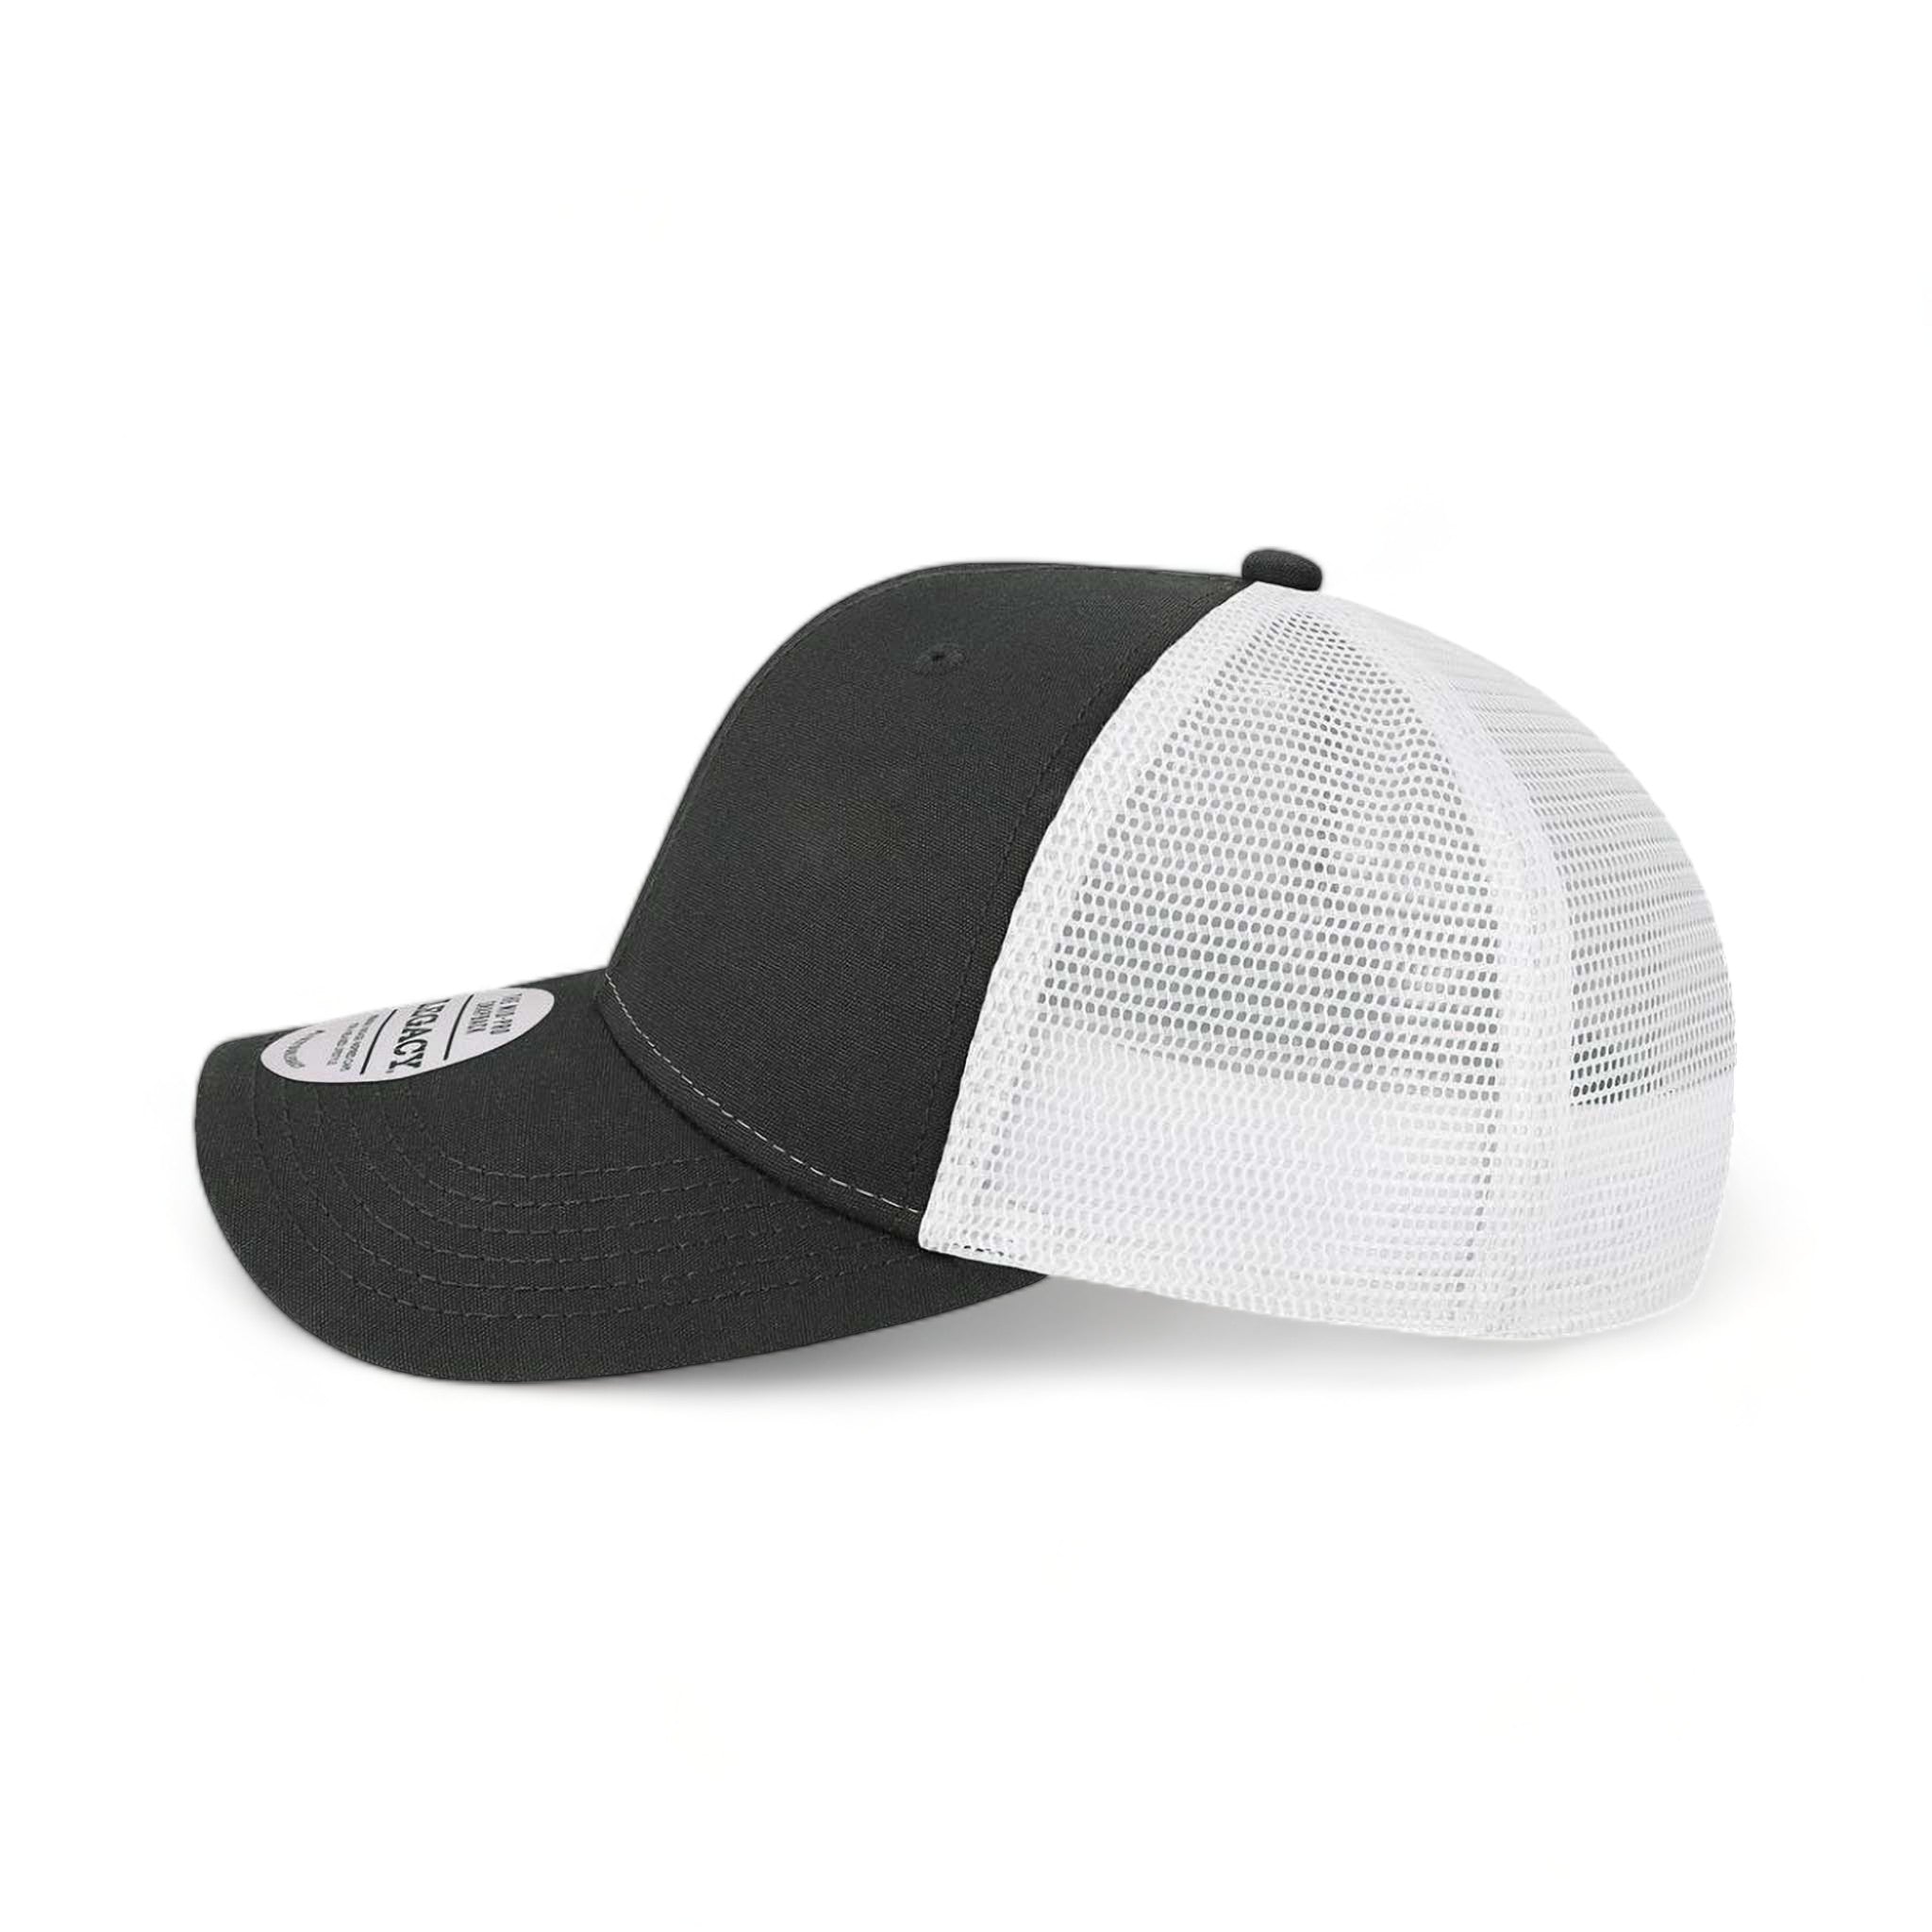 Side view of LEGACY MPS custom hat in black and white